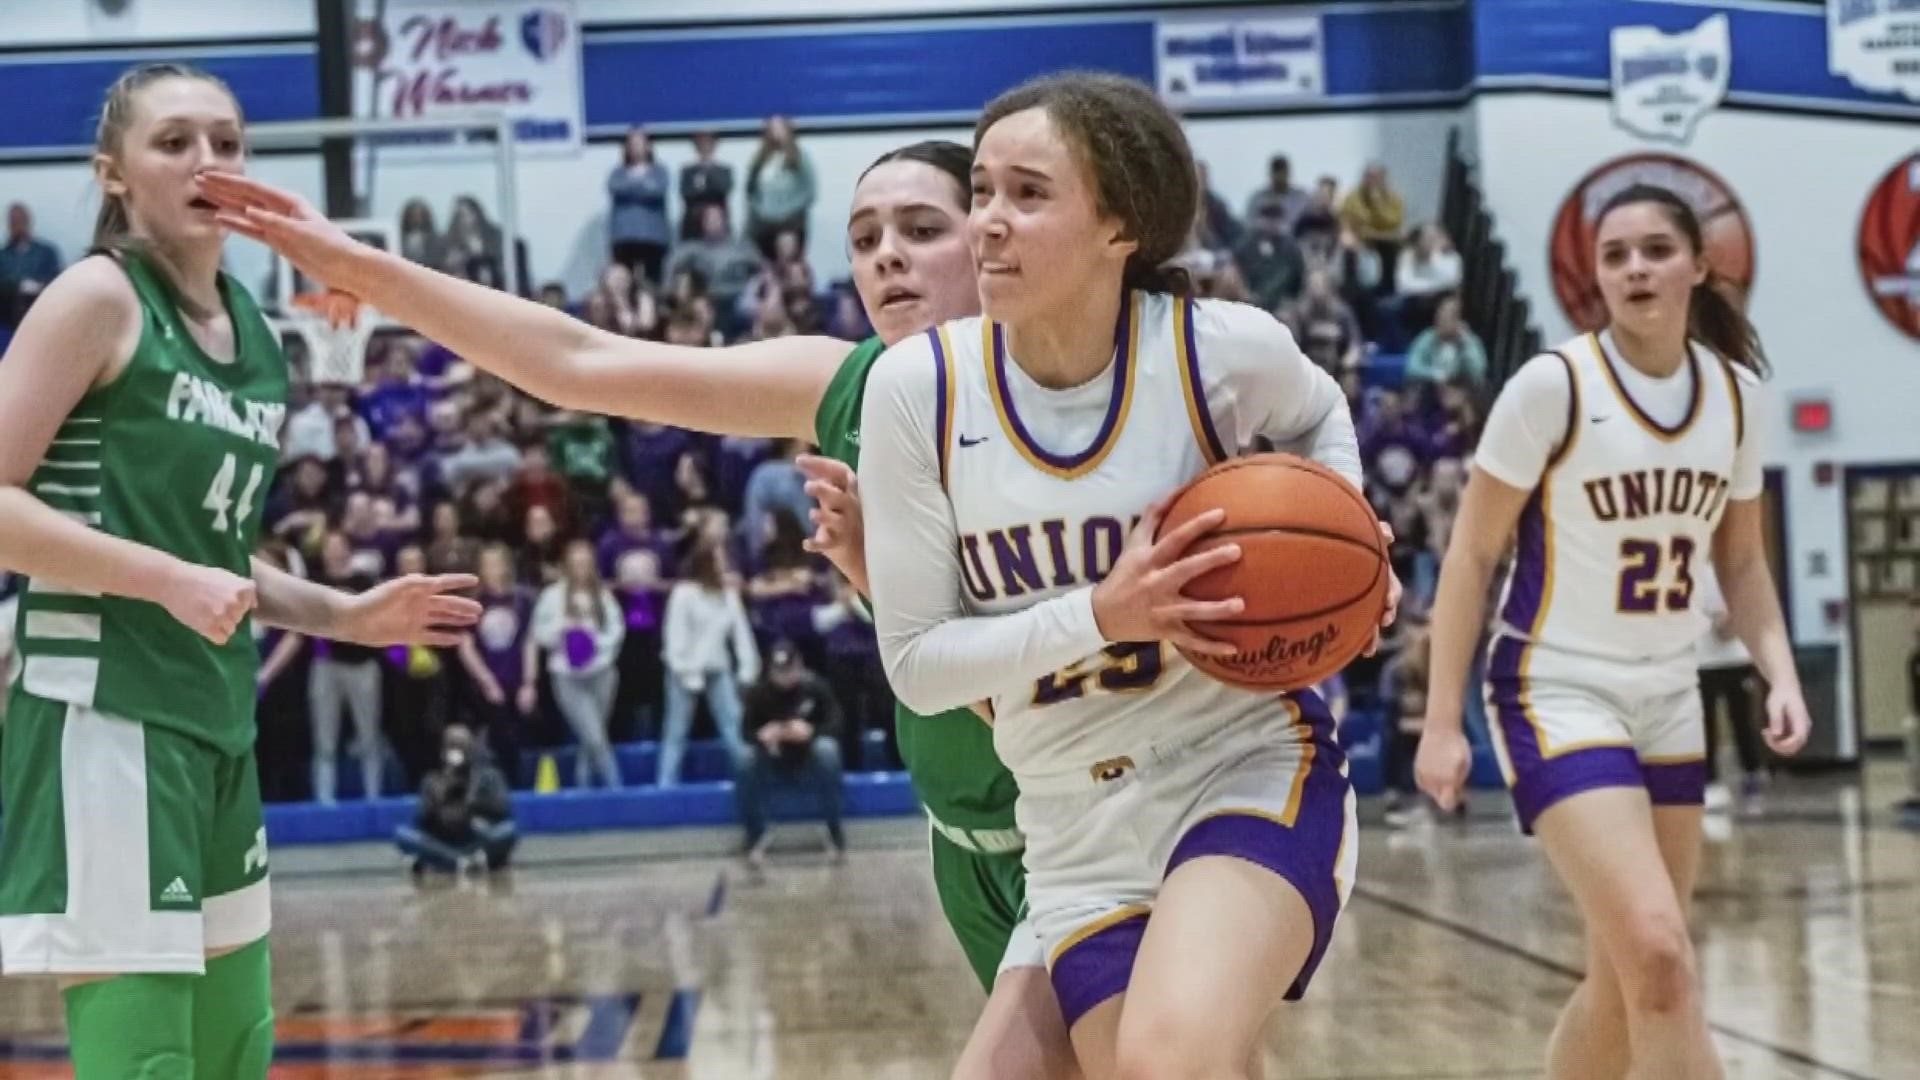 Milee Smith is a freshman basketball player for Unioto High School.